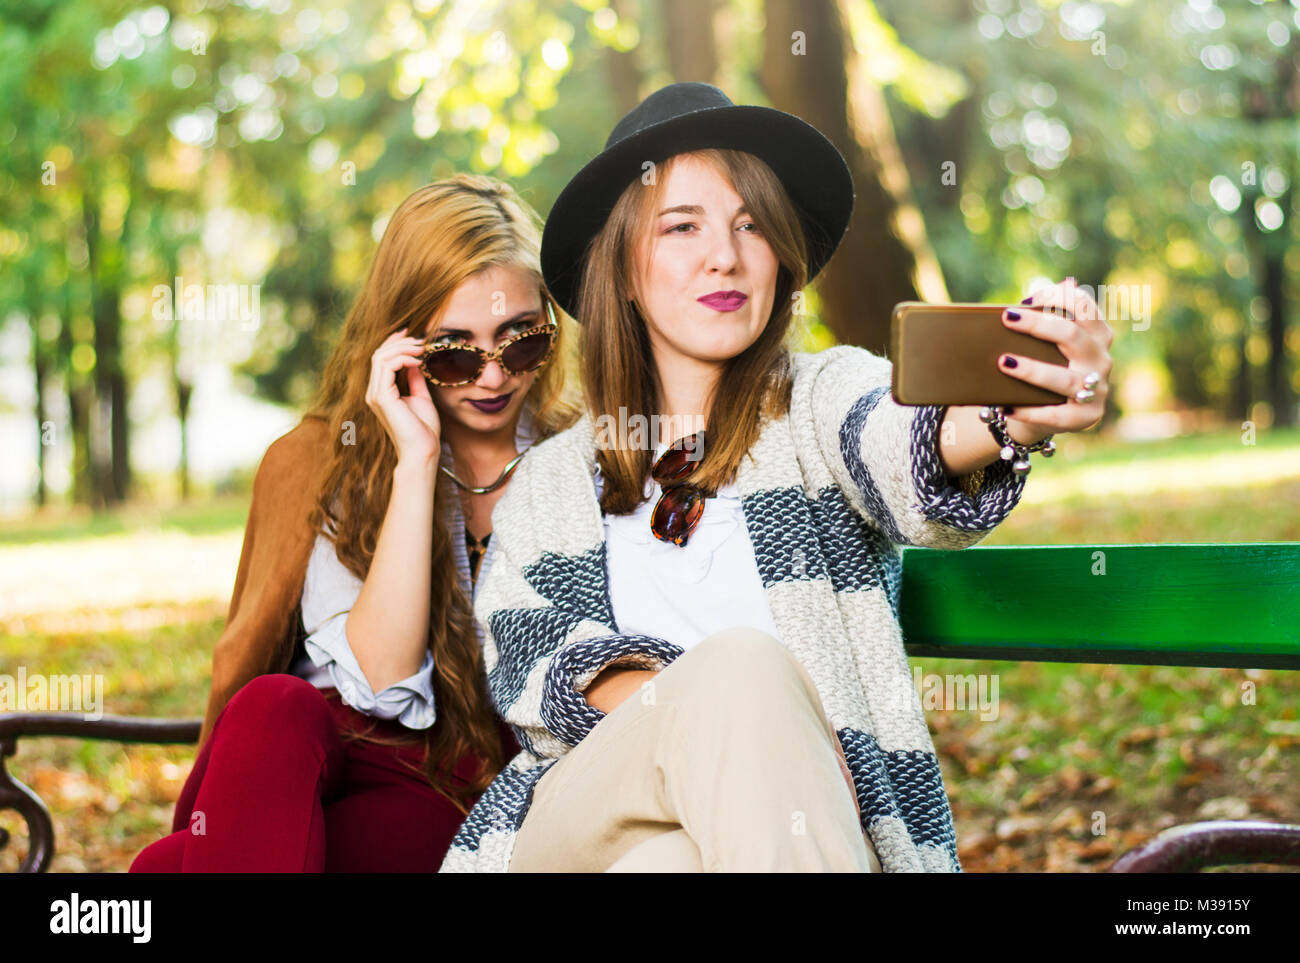 Girlfriends taking a selfie on a bench in the park Stock Photo